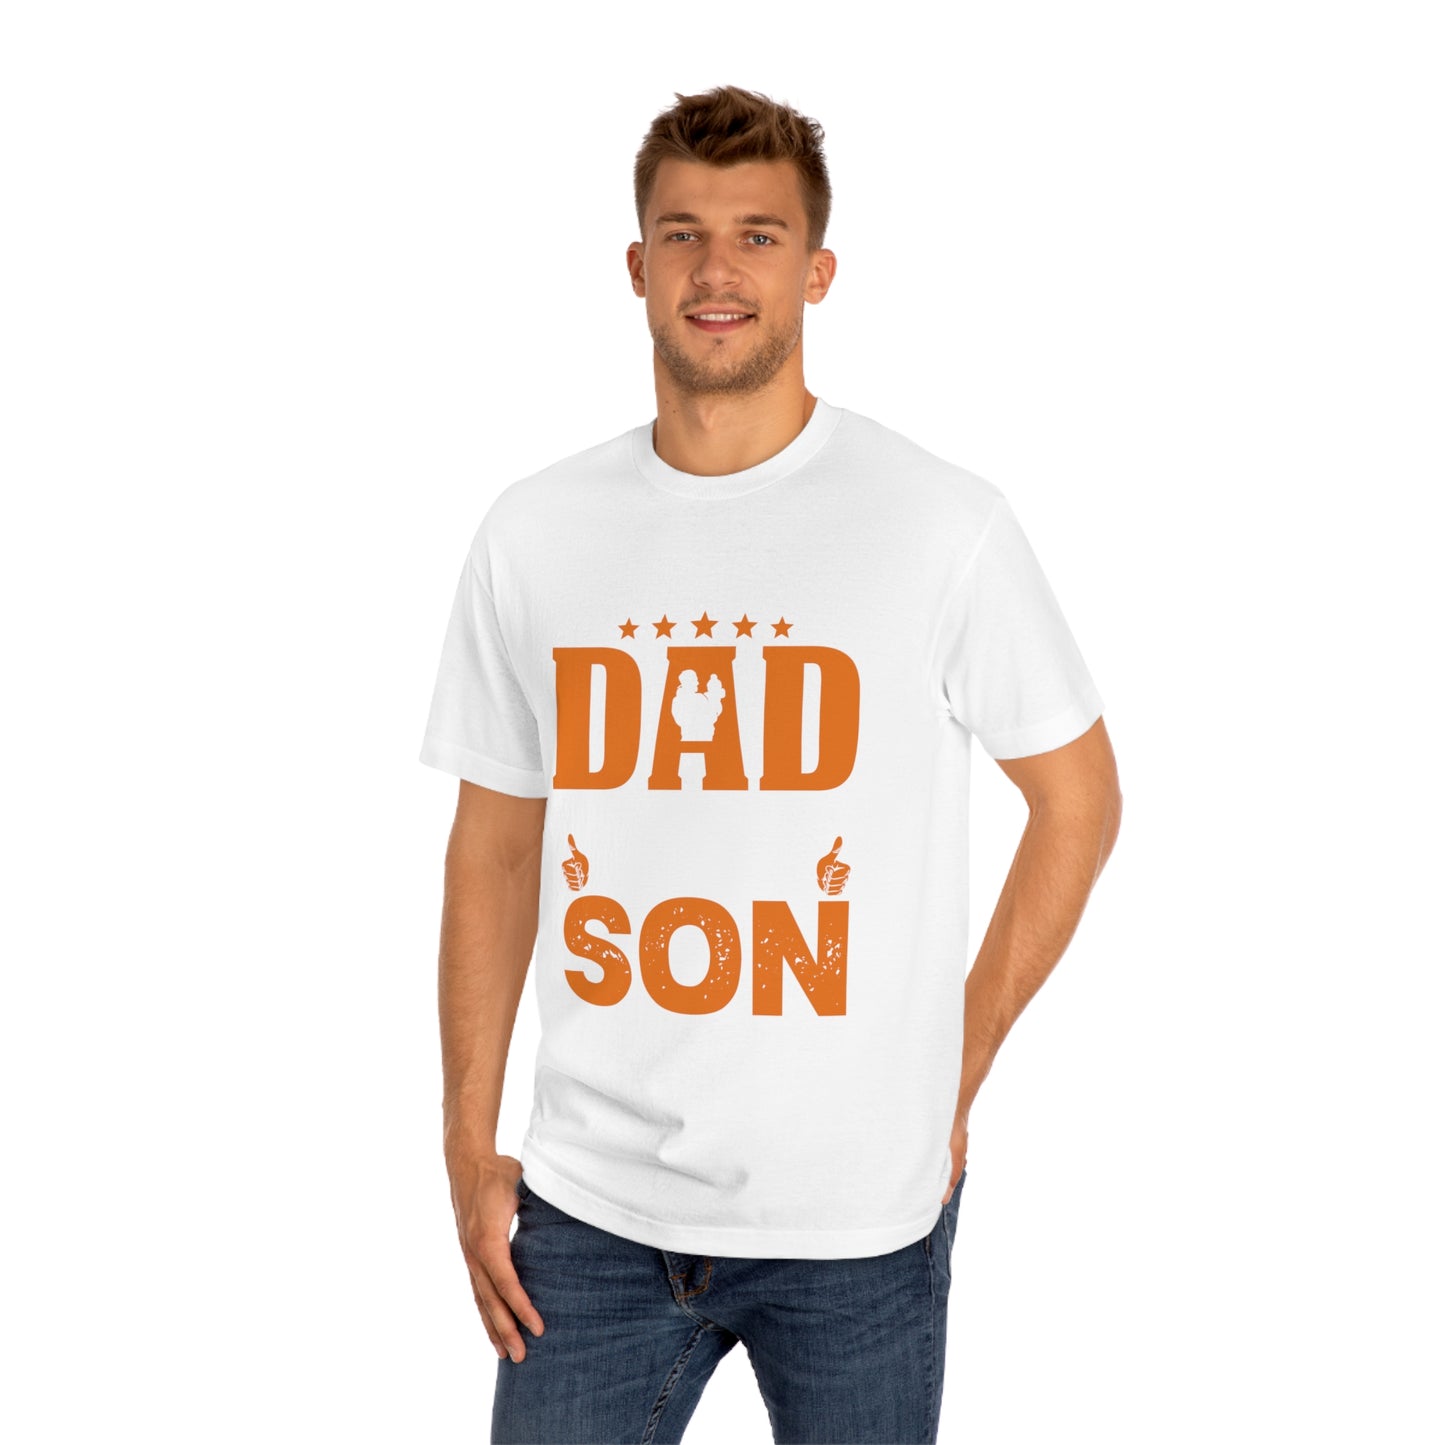 I am a proud Dad Unisex Classic Tee